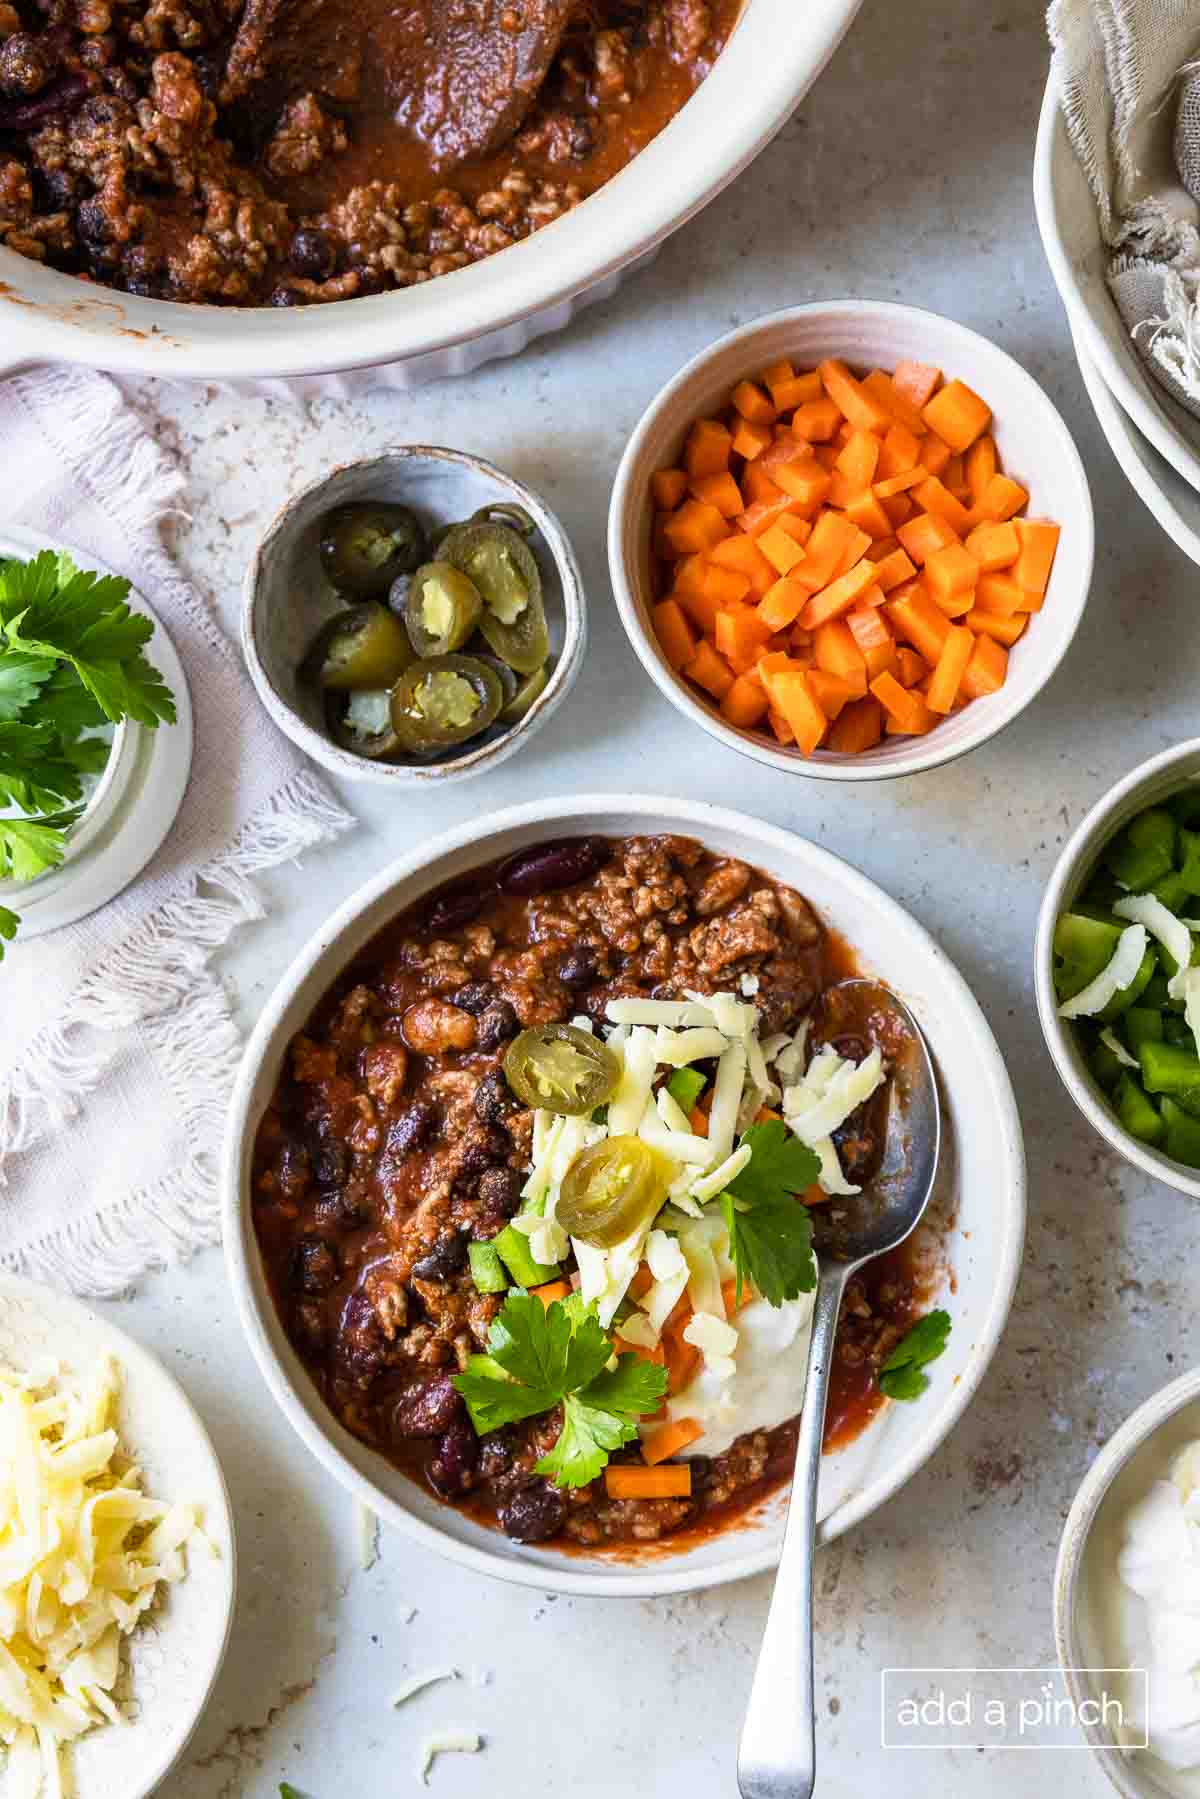 Chili topped with cheese, peppers, and fresh herbs, surrounded by bowls of optional toppings.